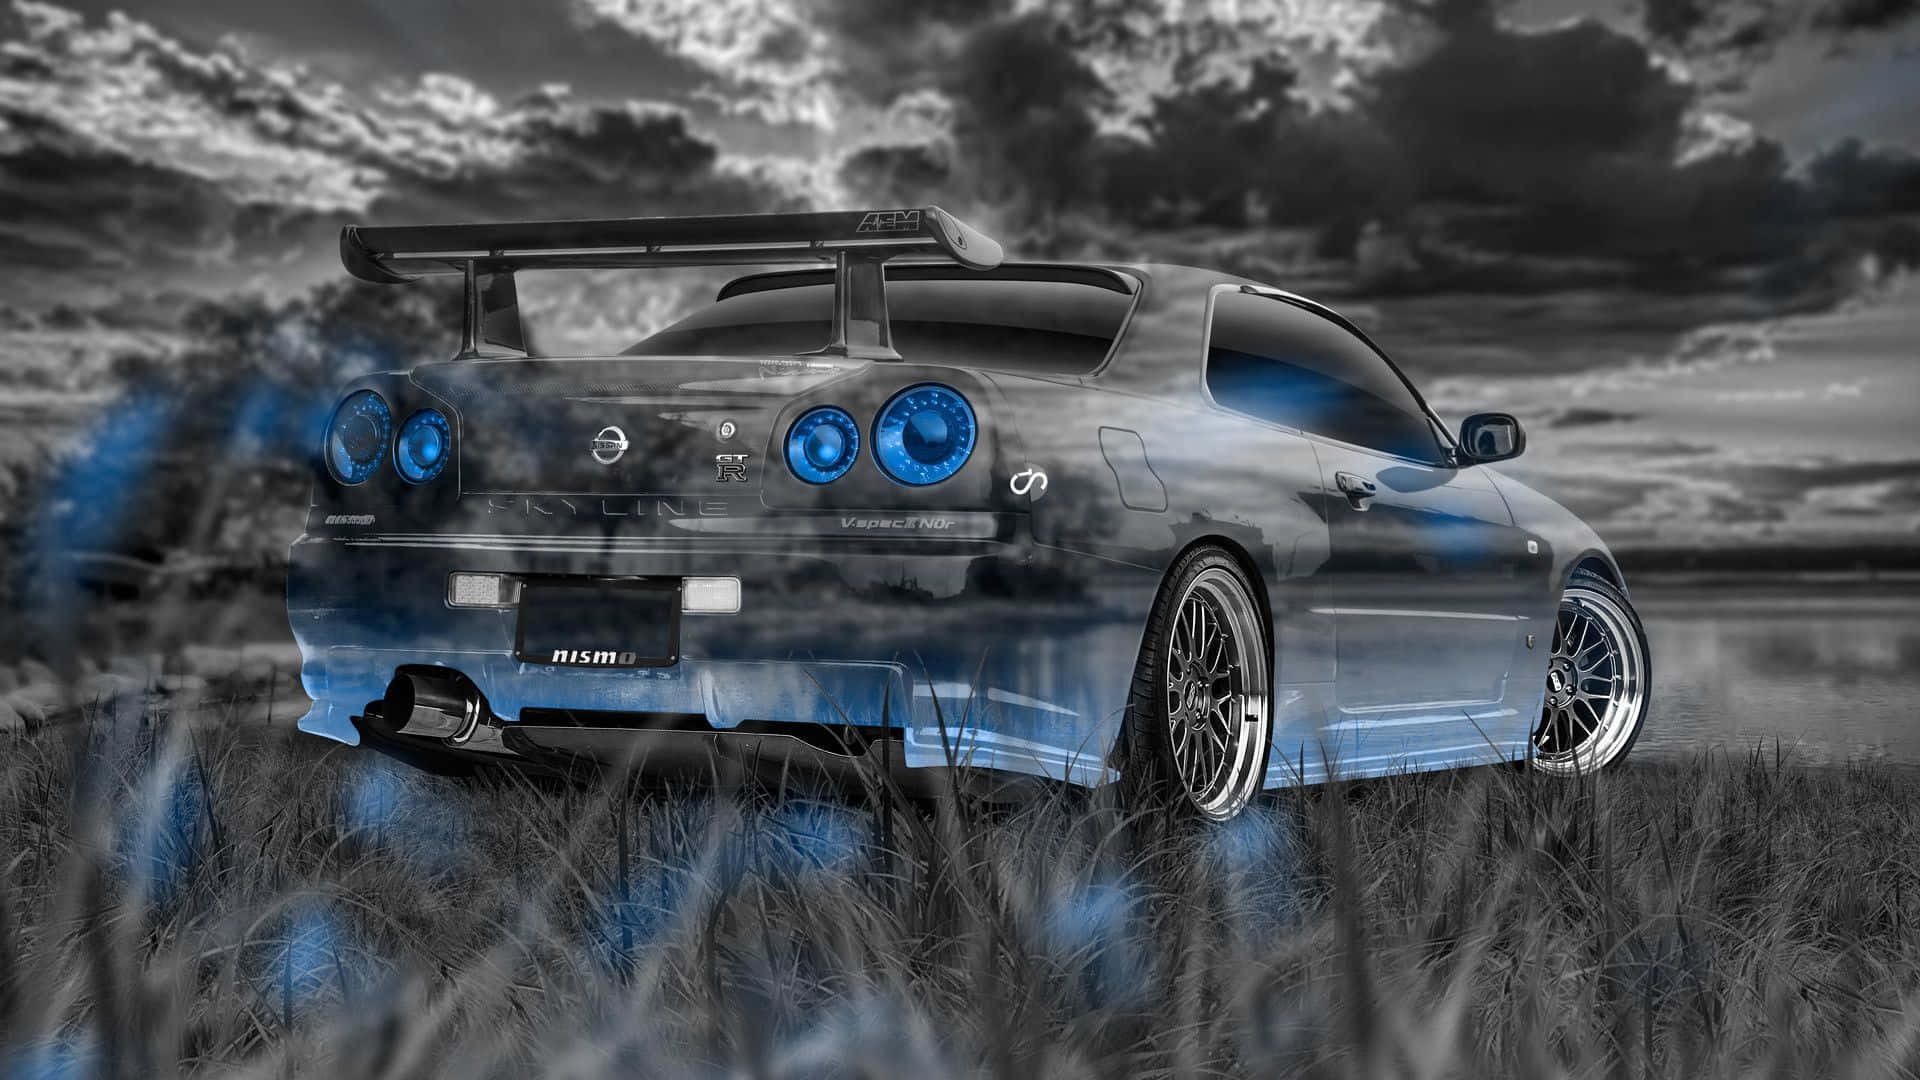 Supercharged Cool Nissan Skyline Wallpaper